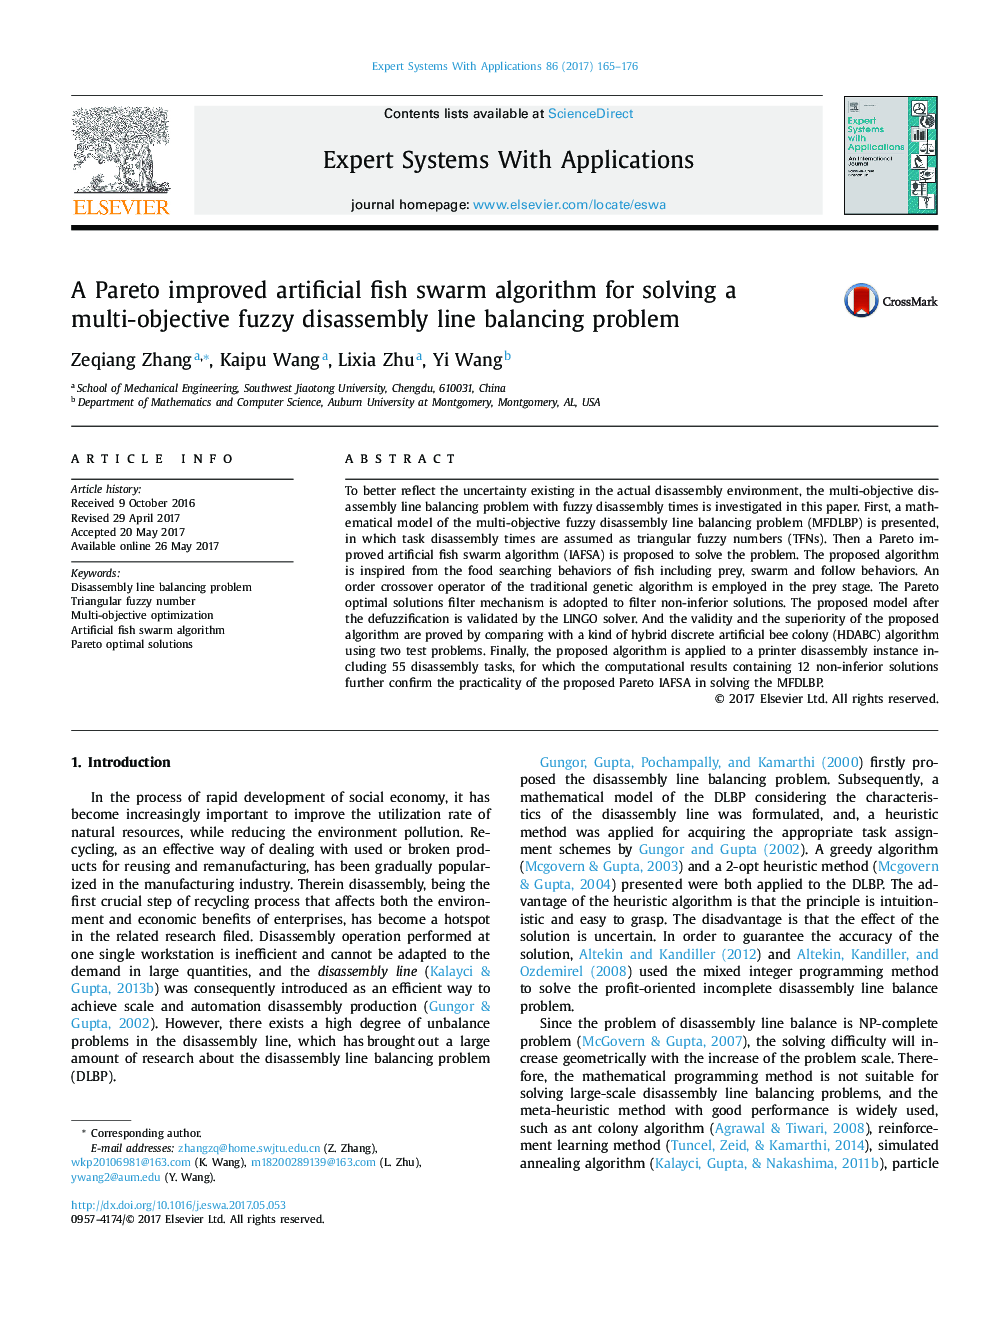 A Pareto improved artificial fish swarm algorithm for solving a multi-objective fuzzy disassembly line balancing problem